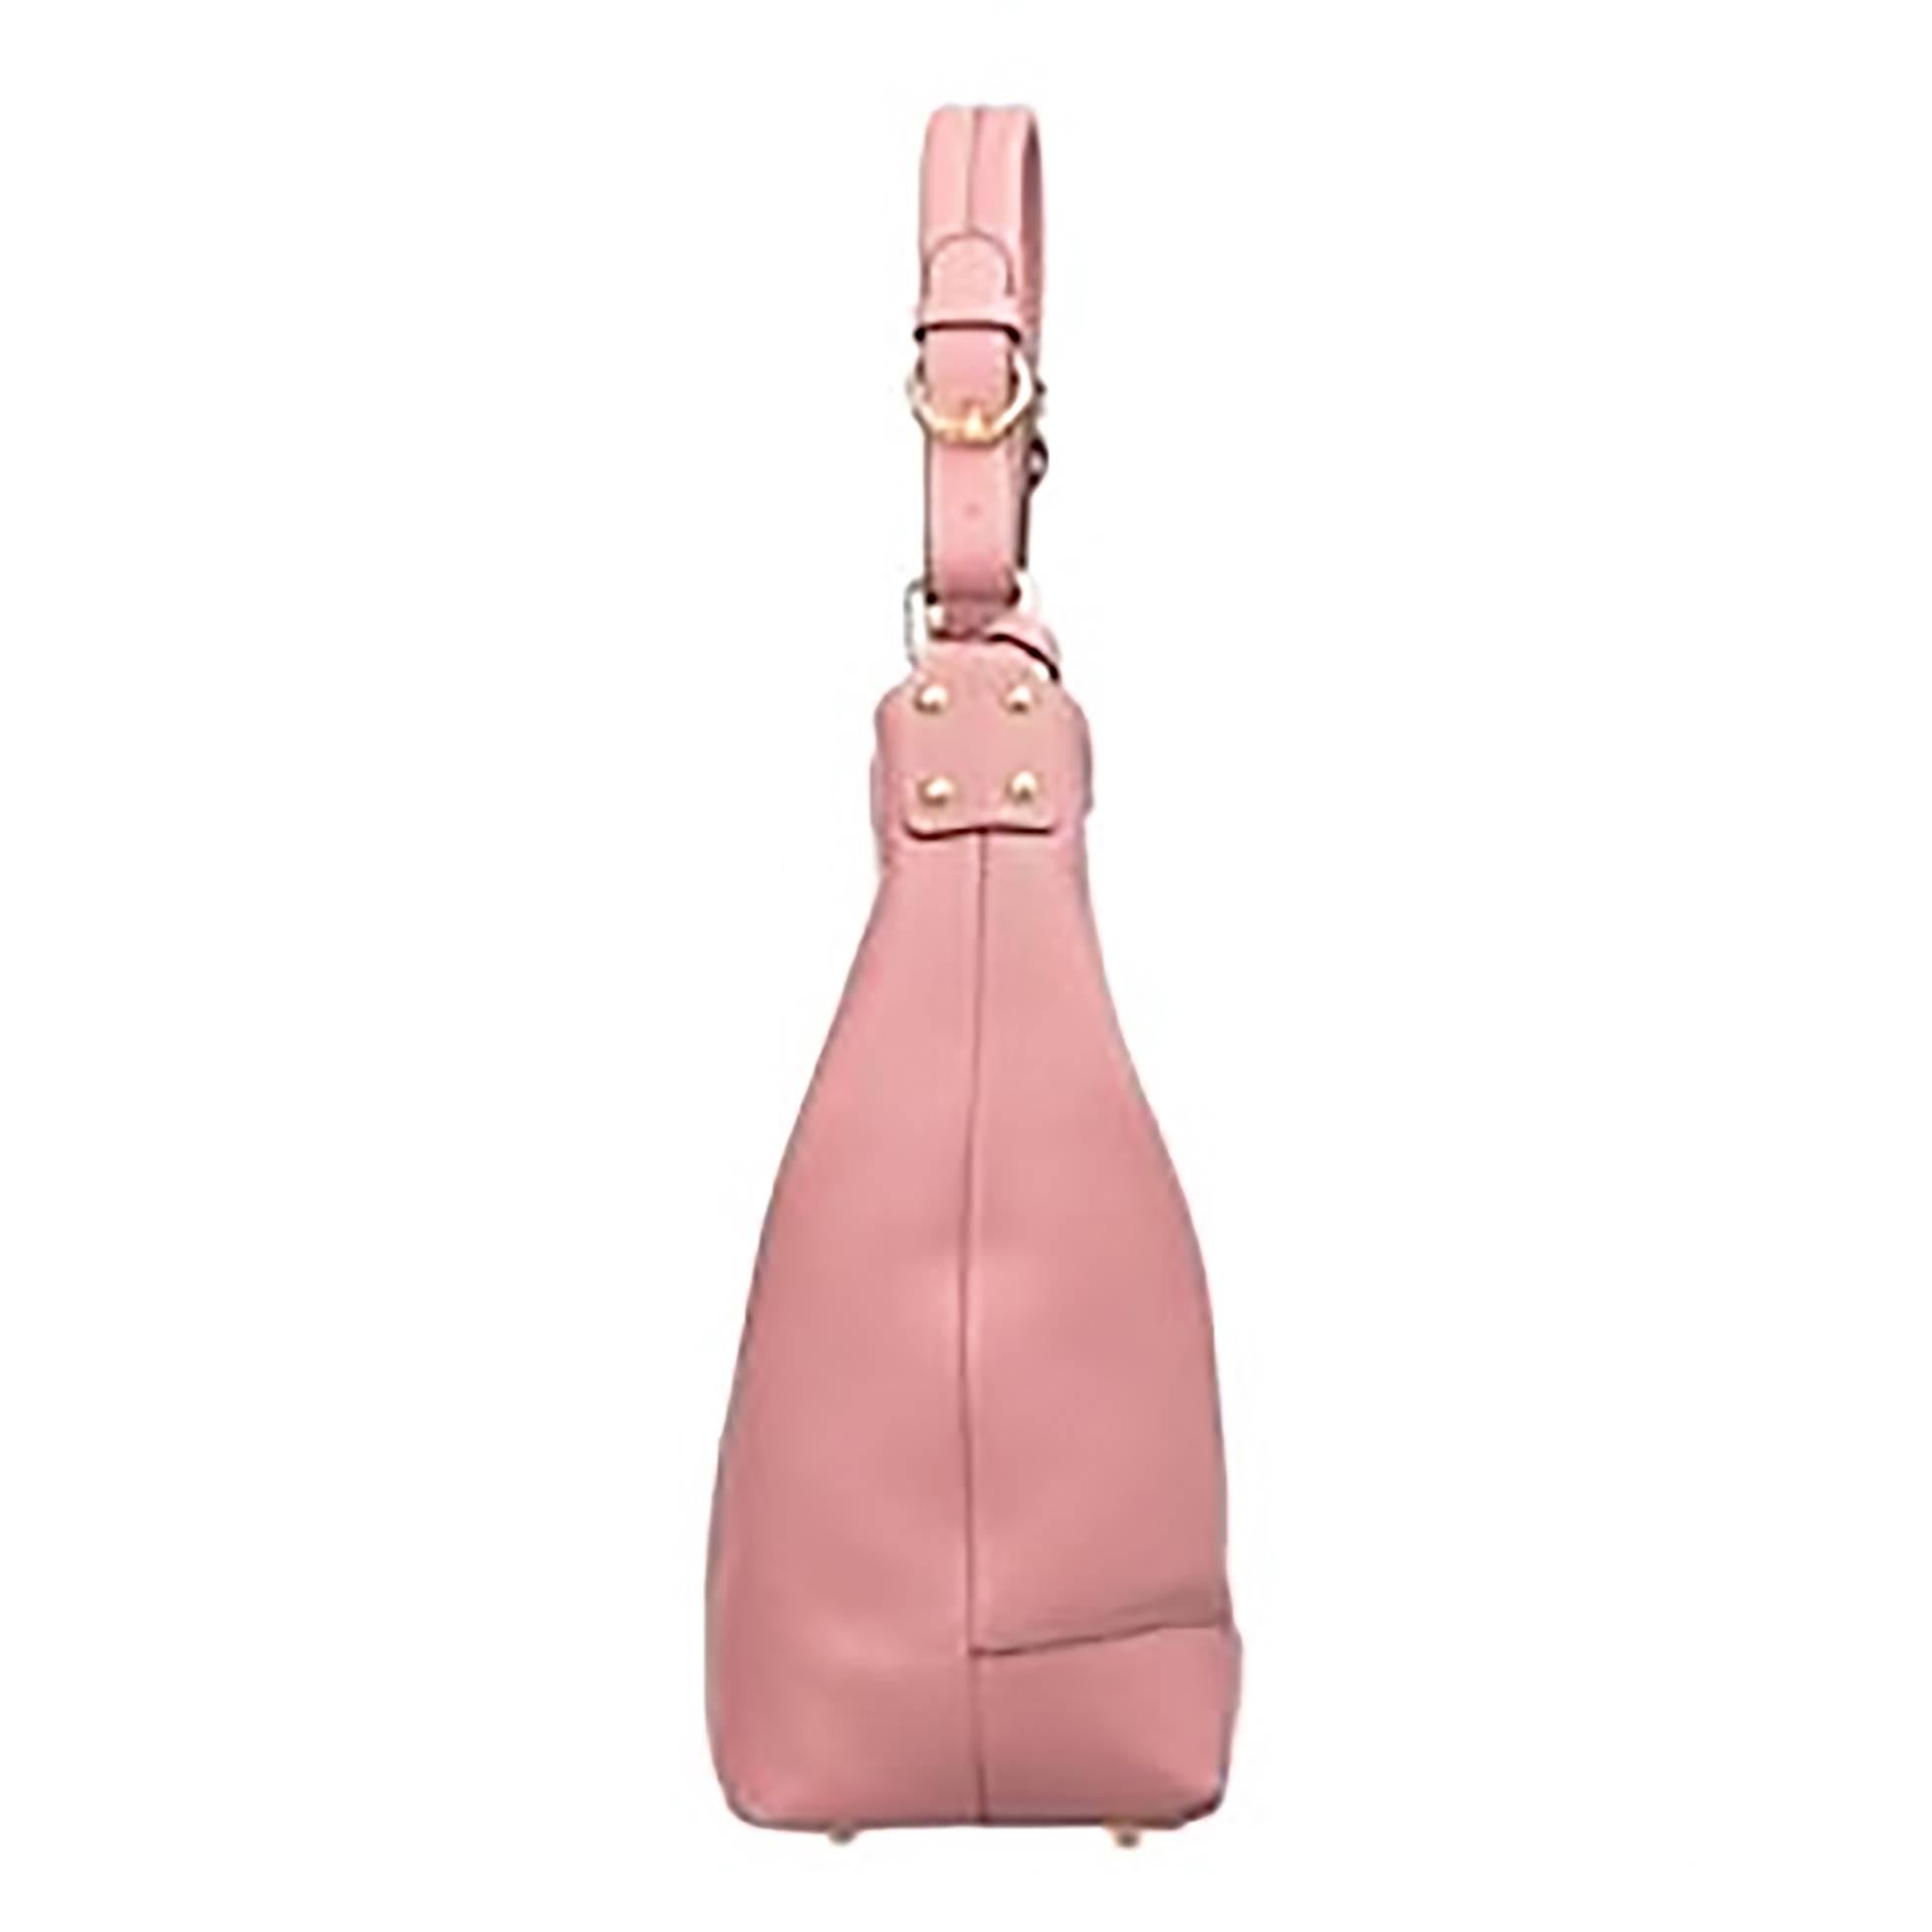 Pierre Cardin New rose pink leather hobo bag handbag In New Condition In Daylesford, Victoria